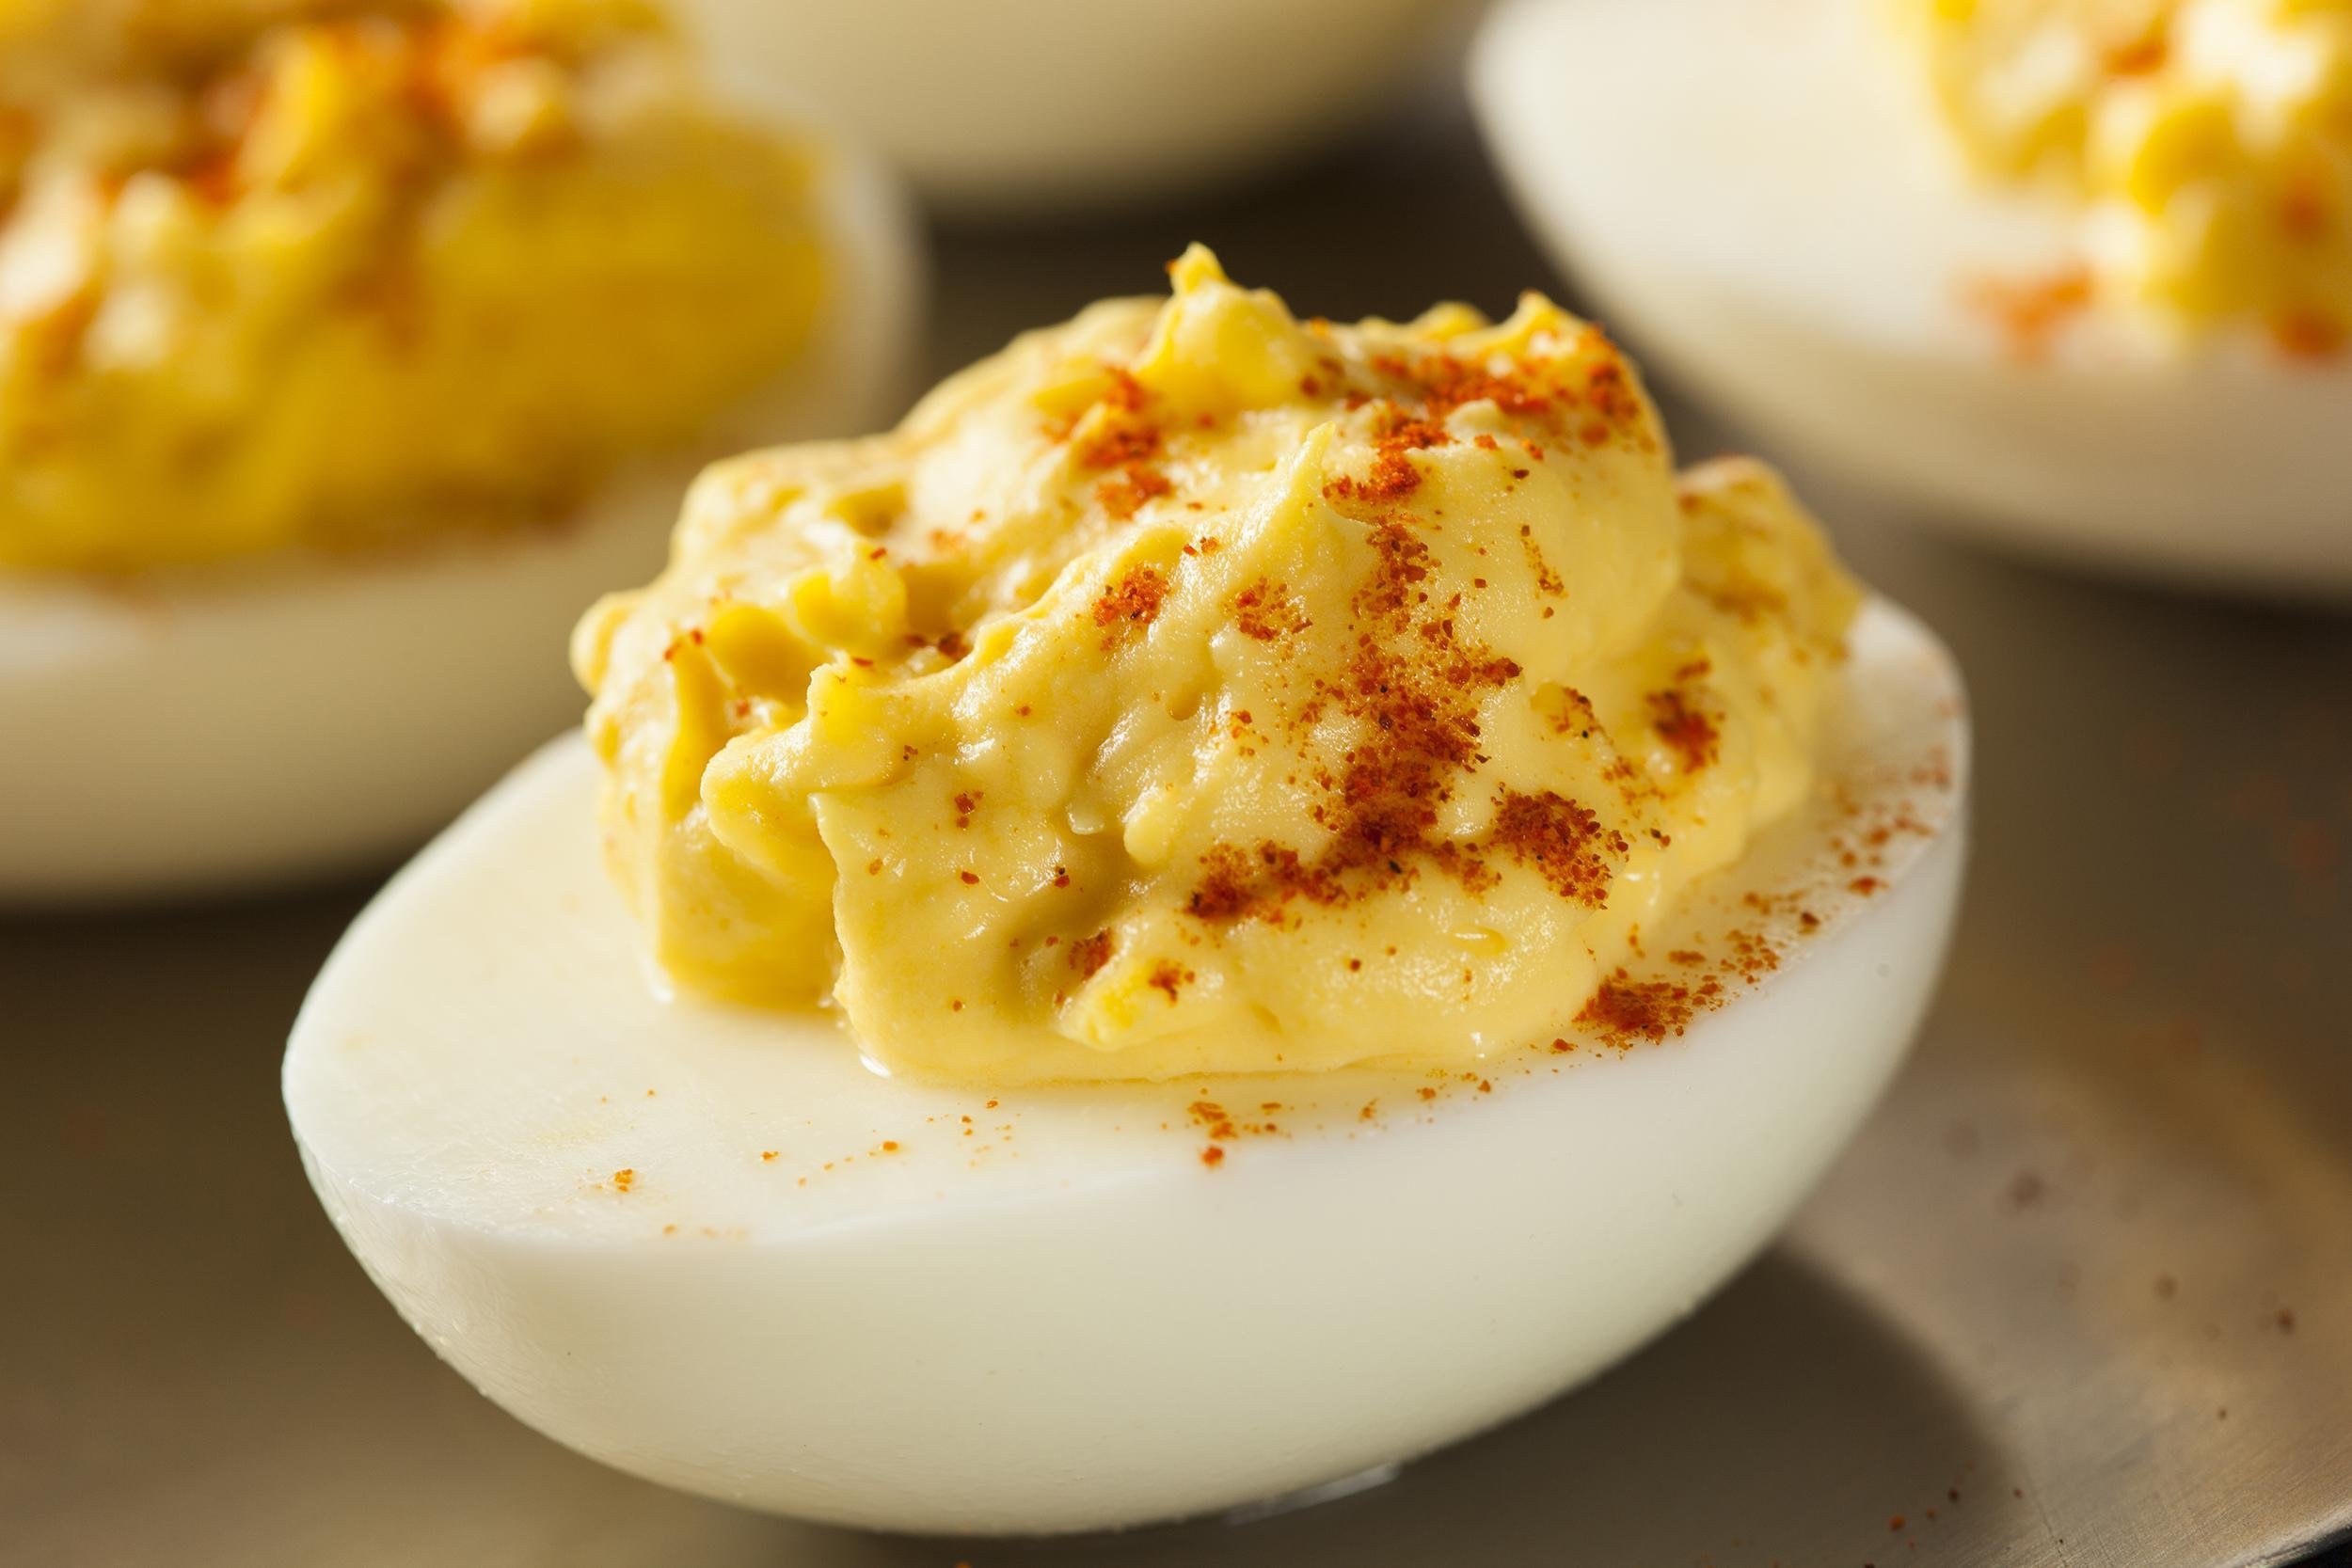 <p>"Deviled" eggs, sometimes called "stuffed" eggs, are simply hard-boiled eggs with the yolks removed, flavored, and returned to the white. Deviled eggs are a bite-sized, tasty <a href="https://blog.cheapism.com/favorite-retro-holiday-recipes/">party classic that never goes out of style</a>. They can also be perfect to enjoy with lunch or as an appetizer before dinner. When making deviled eggs, start by cutting hard-boiled eggs in half lengthwise and scooping out the yolks. In a bowl, combine the yolks and 2 tablespoons vegetable oil, 1 tablespoon lemon juice or vinegar, one-half teaspoon table salt, one-half teaspoon freshly ground pepper, and 1-and-a-half teaspoons yellow or spicy brown mustard. Mash together until smooth. Spoon the mixture back inside the yolk-less egg whites and <a href="https://blog.cheapism.com/leftover-recipes-3493/">sprinkle with paprika</a>. Serve immediately or store in the refrigerator for up to three days. These deviled eggs are delicious but can can be modified in an almost endless number of ways to cater to different tastes.</p>